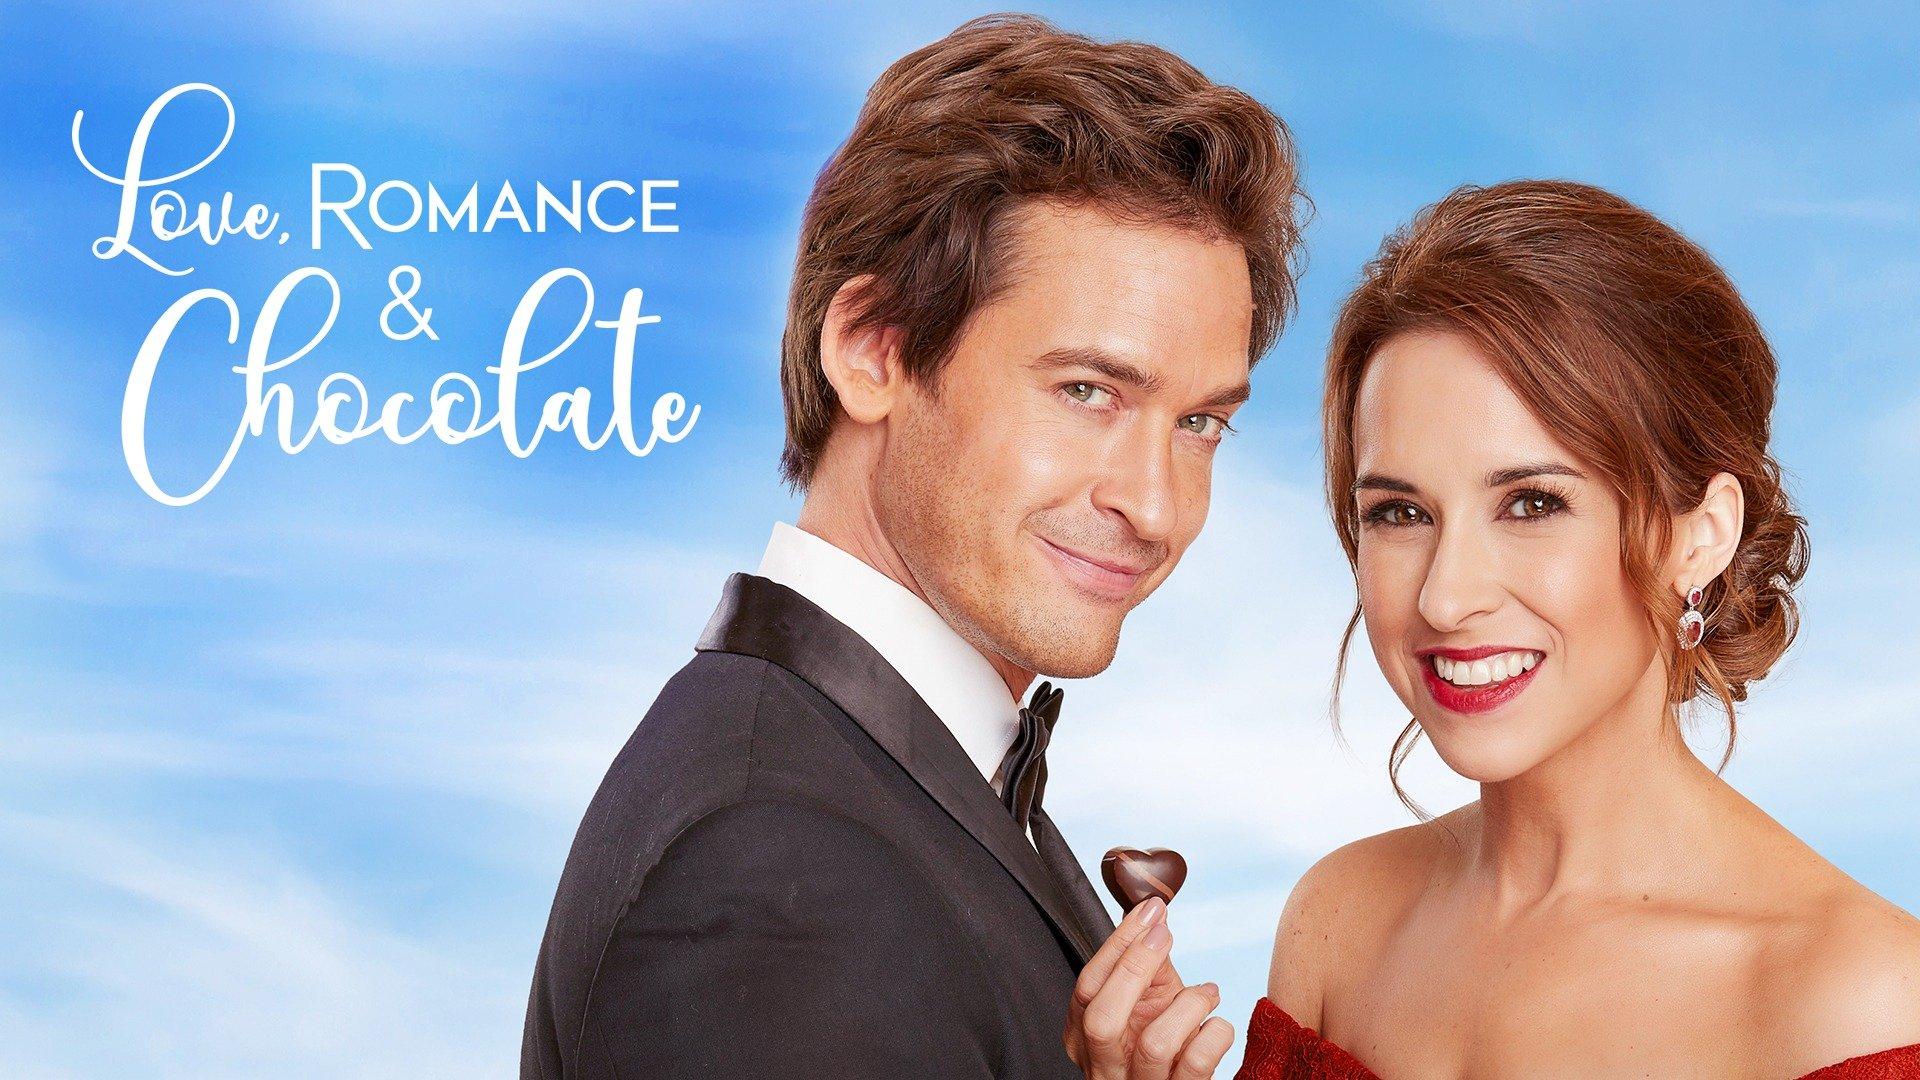 Romance with Chocolate - Hidden Items download the last version for android